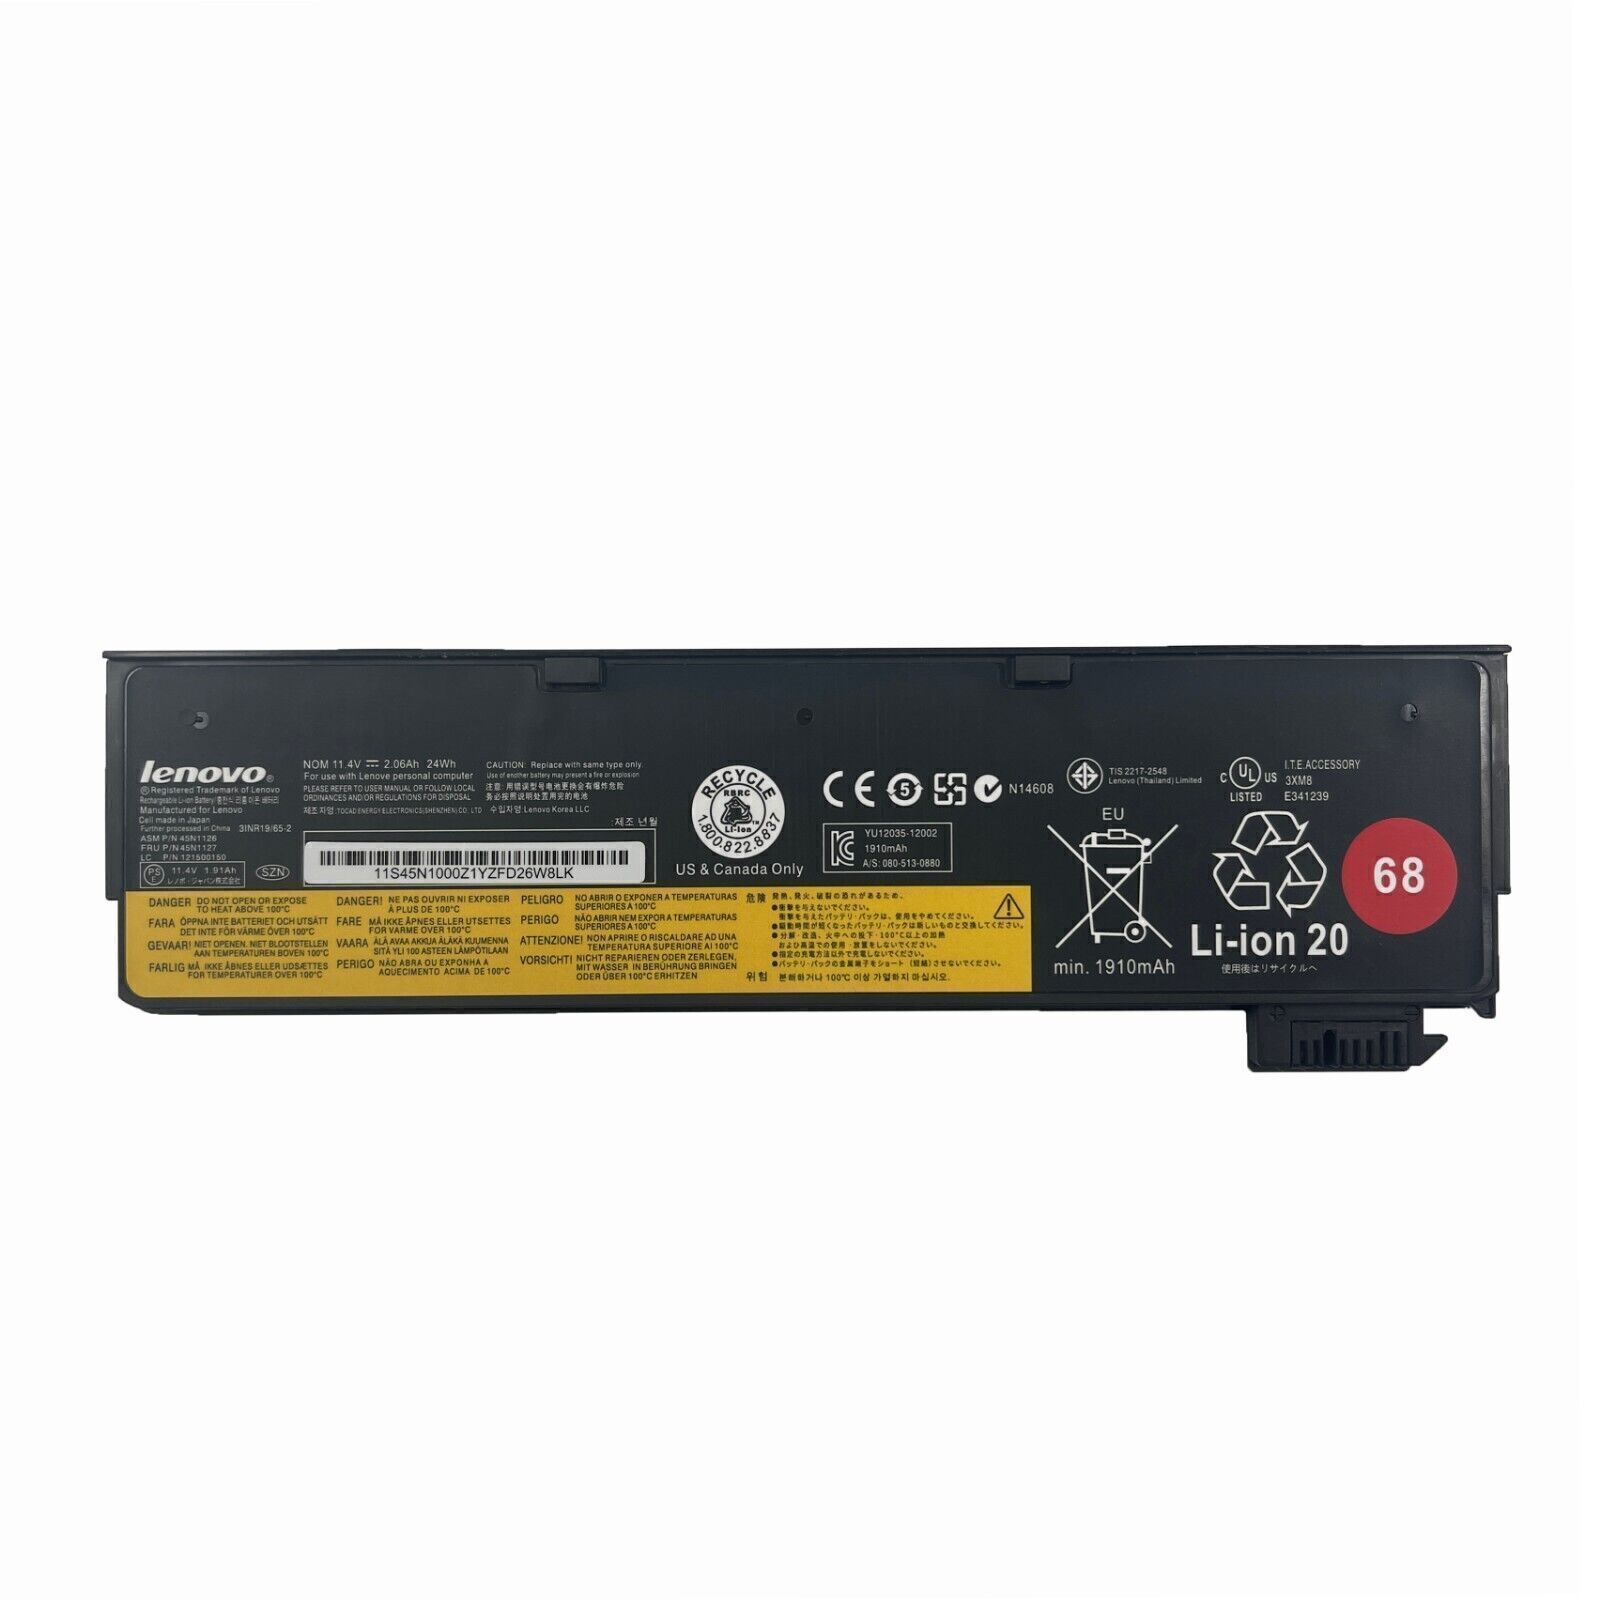 68 Genuine 24Wh X240 Battery For Lenovo Thinkpad X240s W550 L450 T440s T460p US